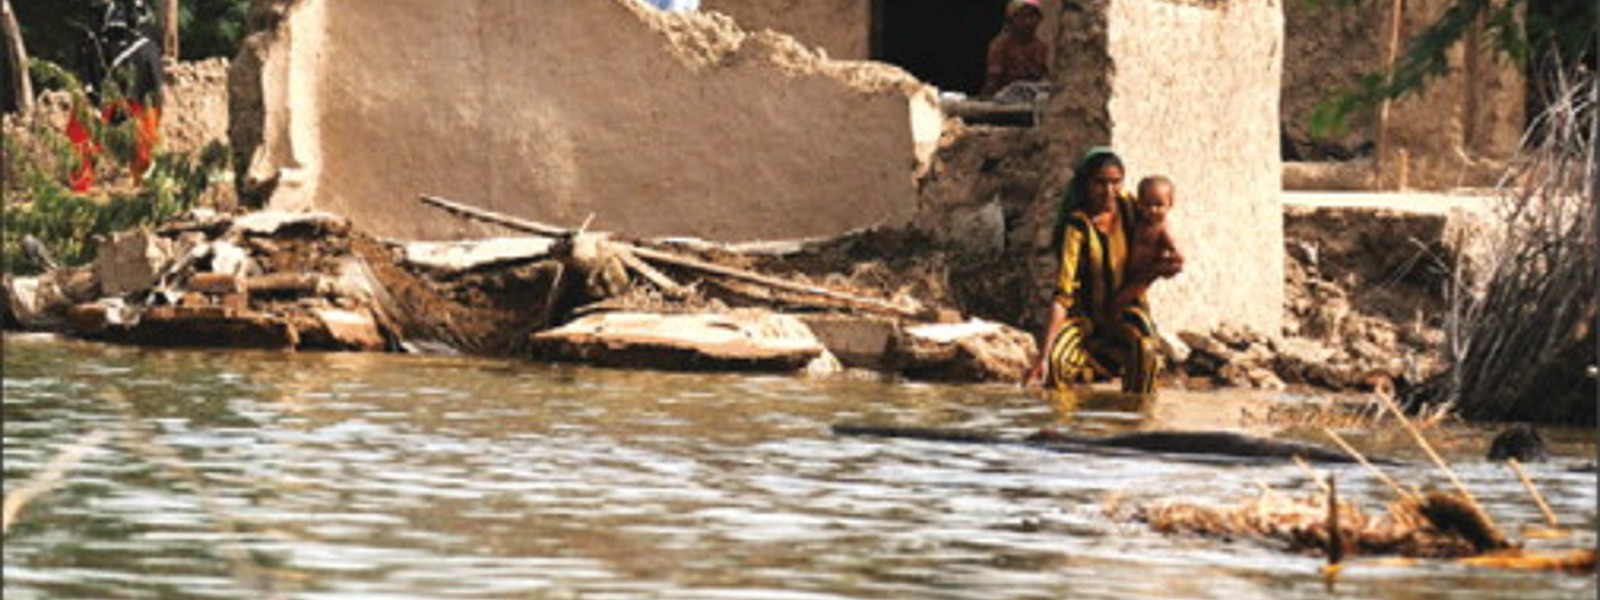 #Pakistan: Millions affected by heavy flooding